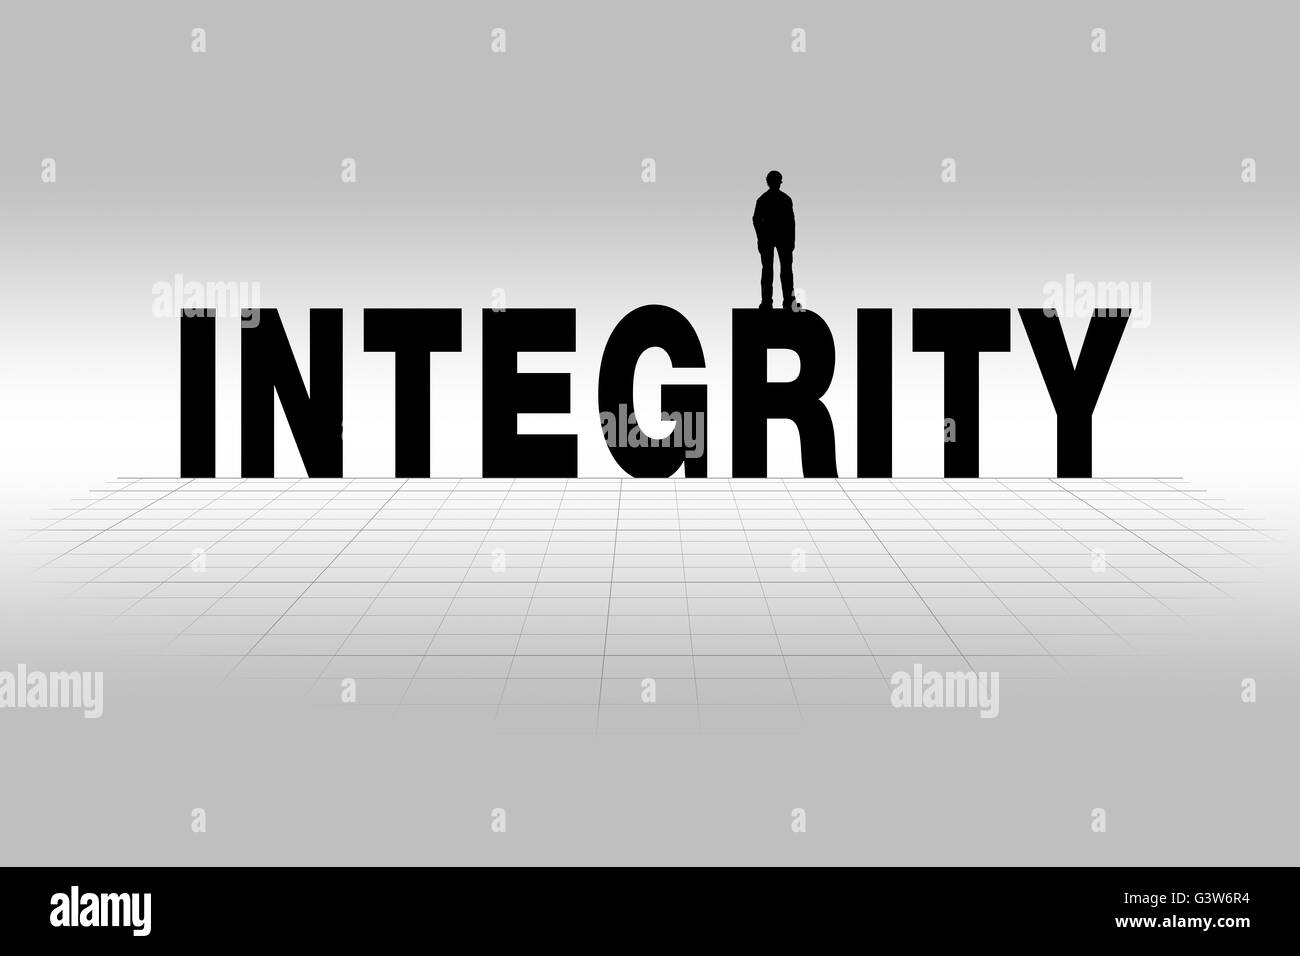 Integrity word communicating business concept of integrity in silhouette. Stock Photo